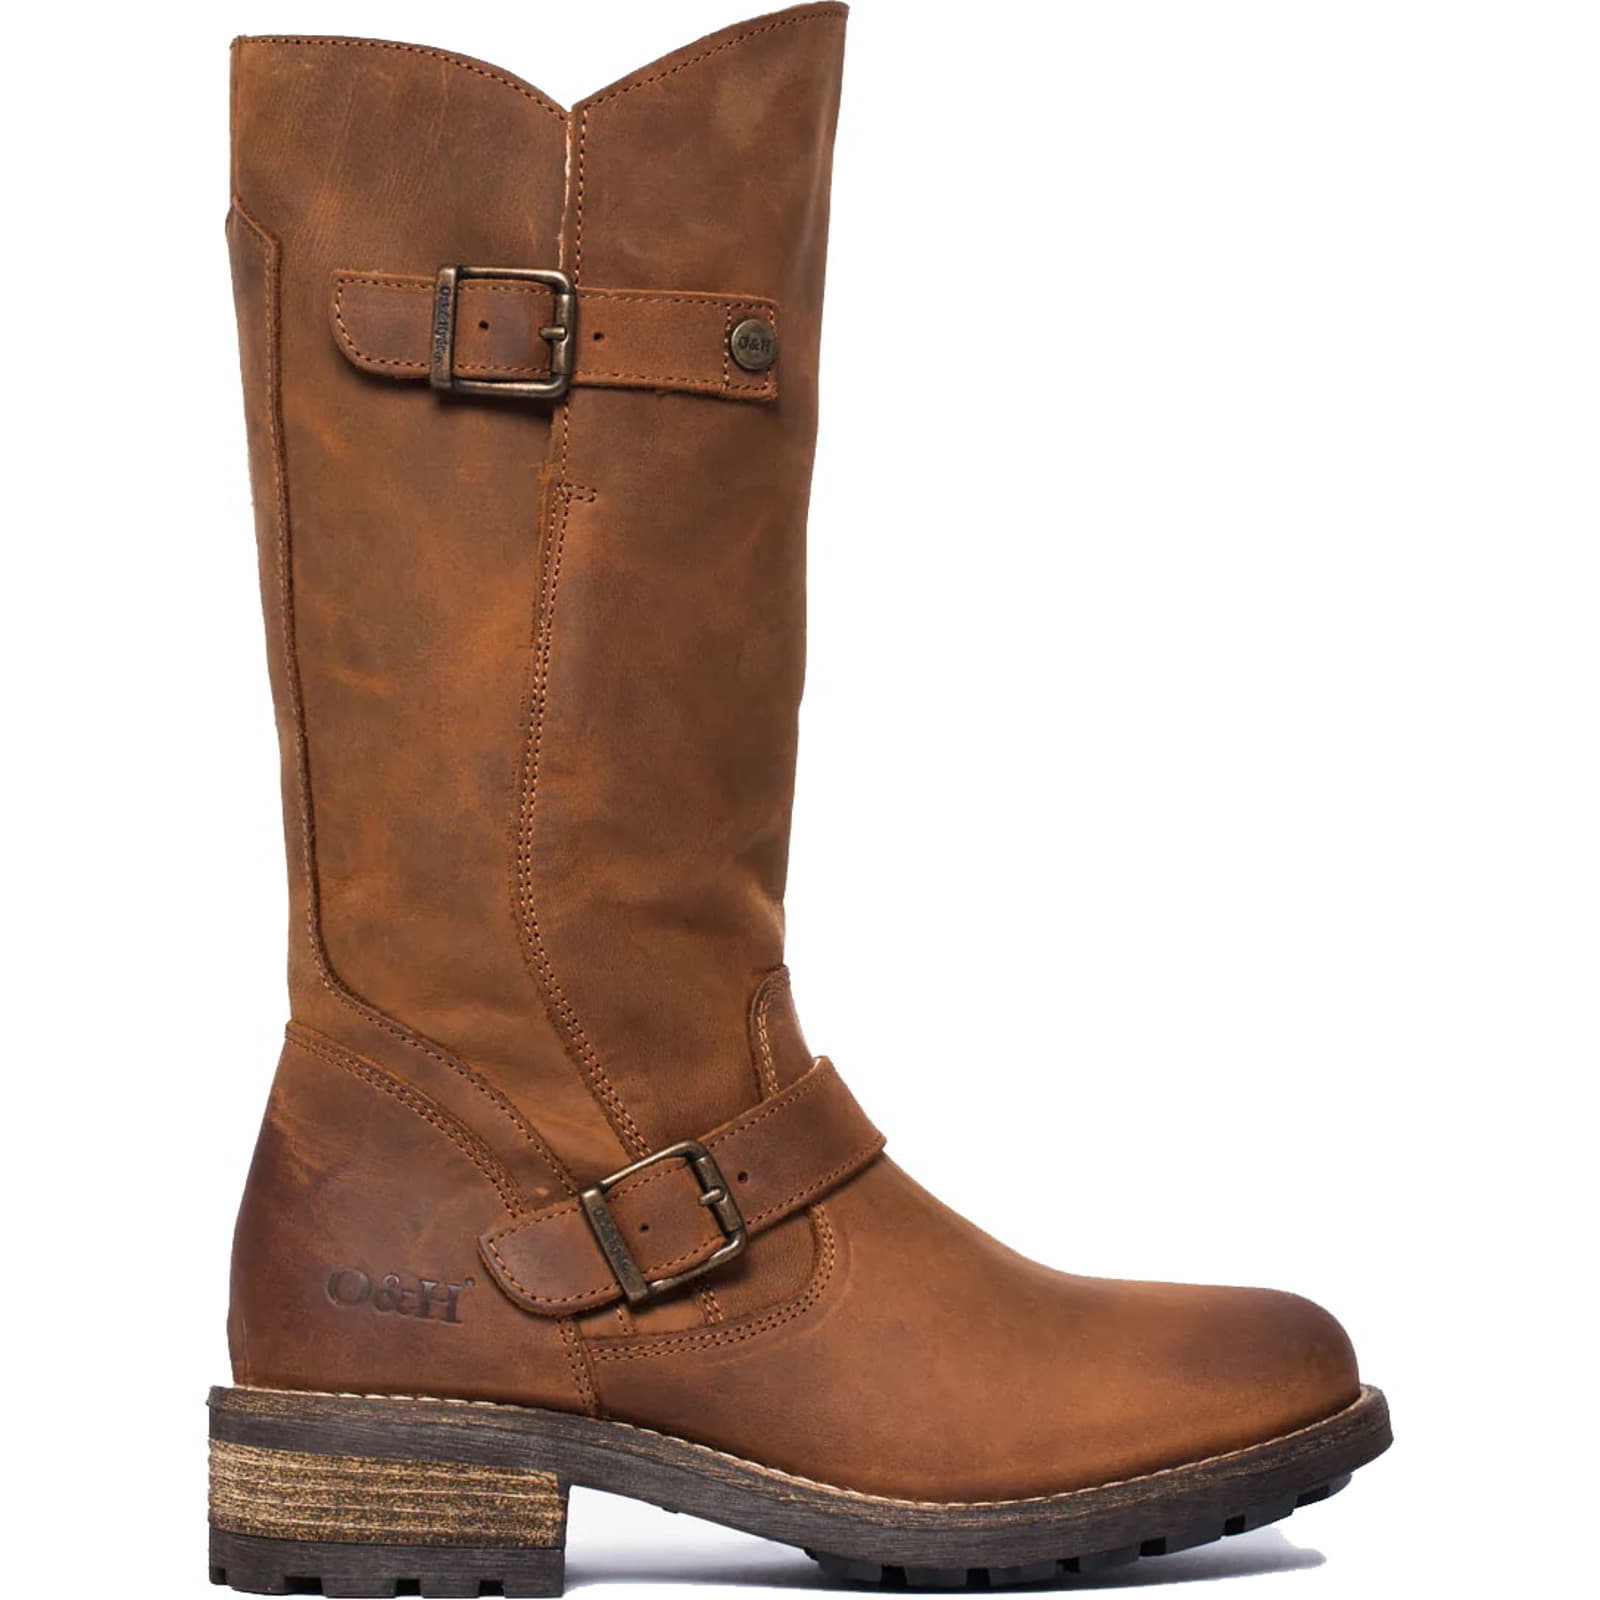 Crest Womens Tall Leather Boots - Cognac